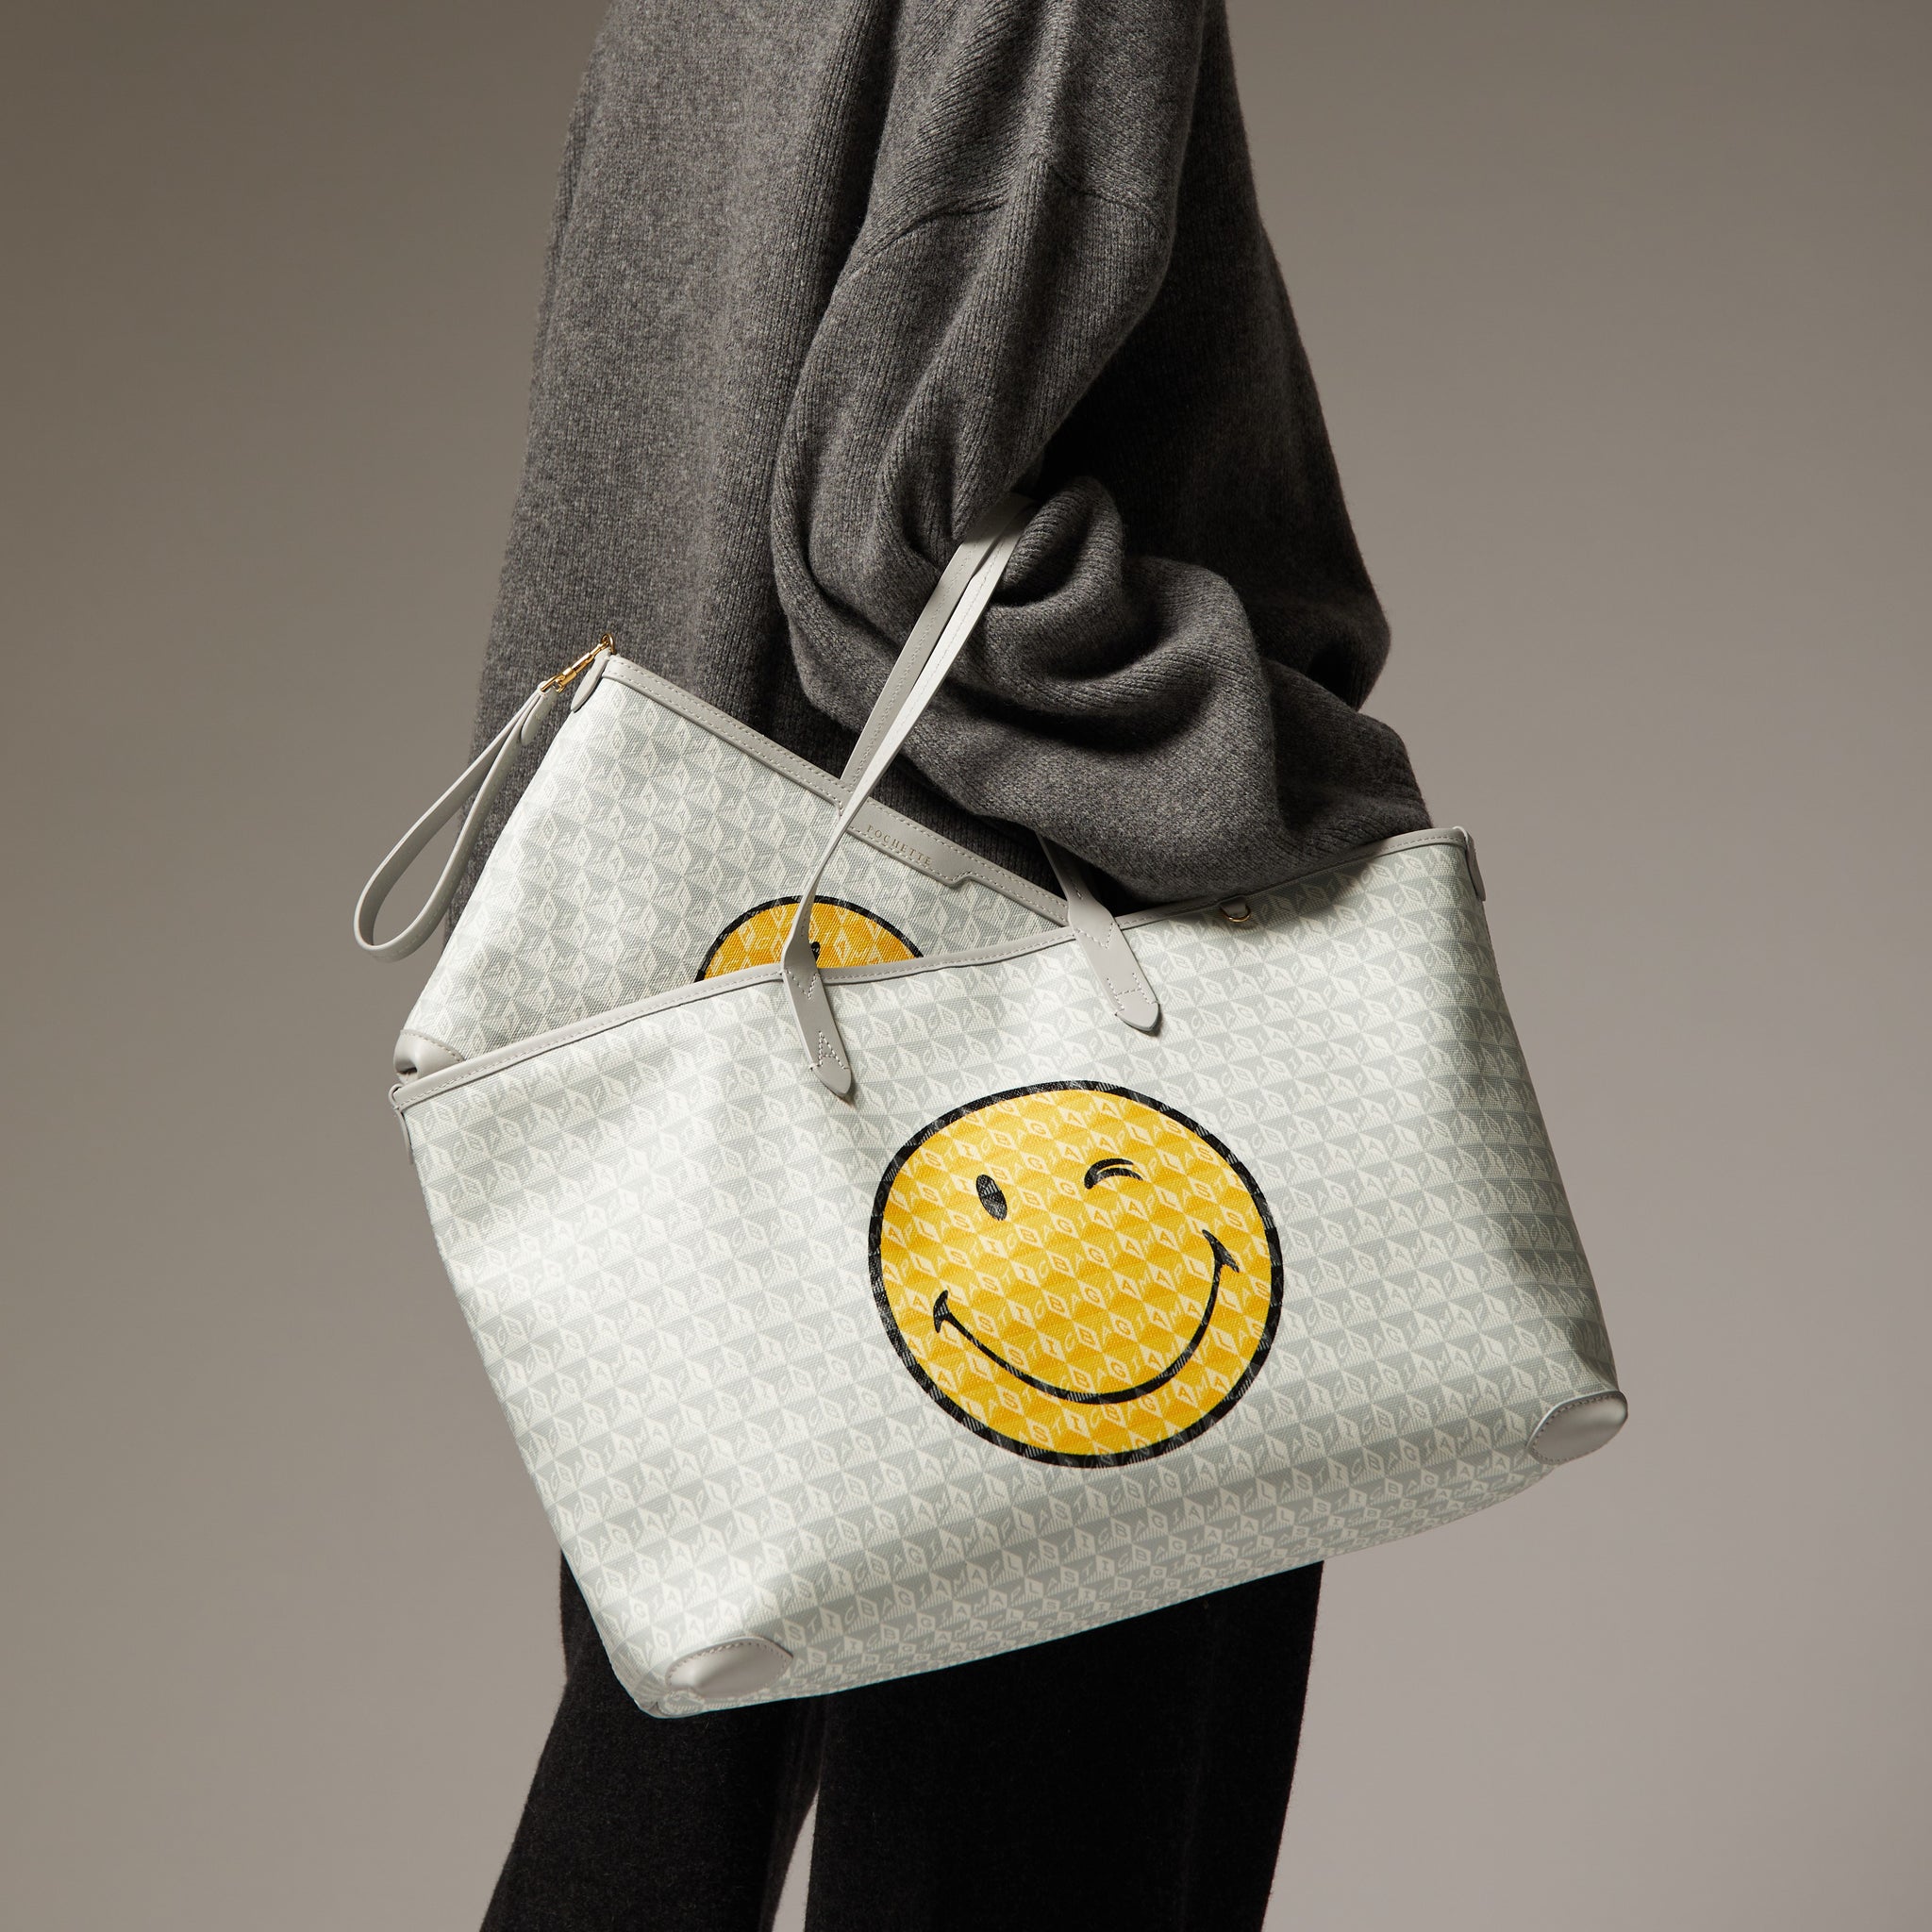 「I AM A Plastic Bag」 ウィンク トート -

                  
                    Recycled Coated Canvas in Frost -
                  

                  Anya Hindmarch JP
